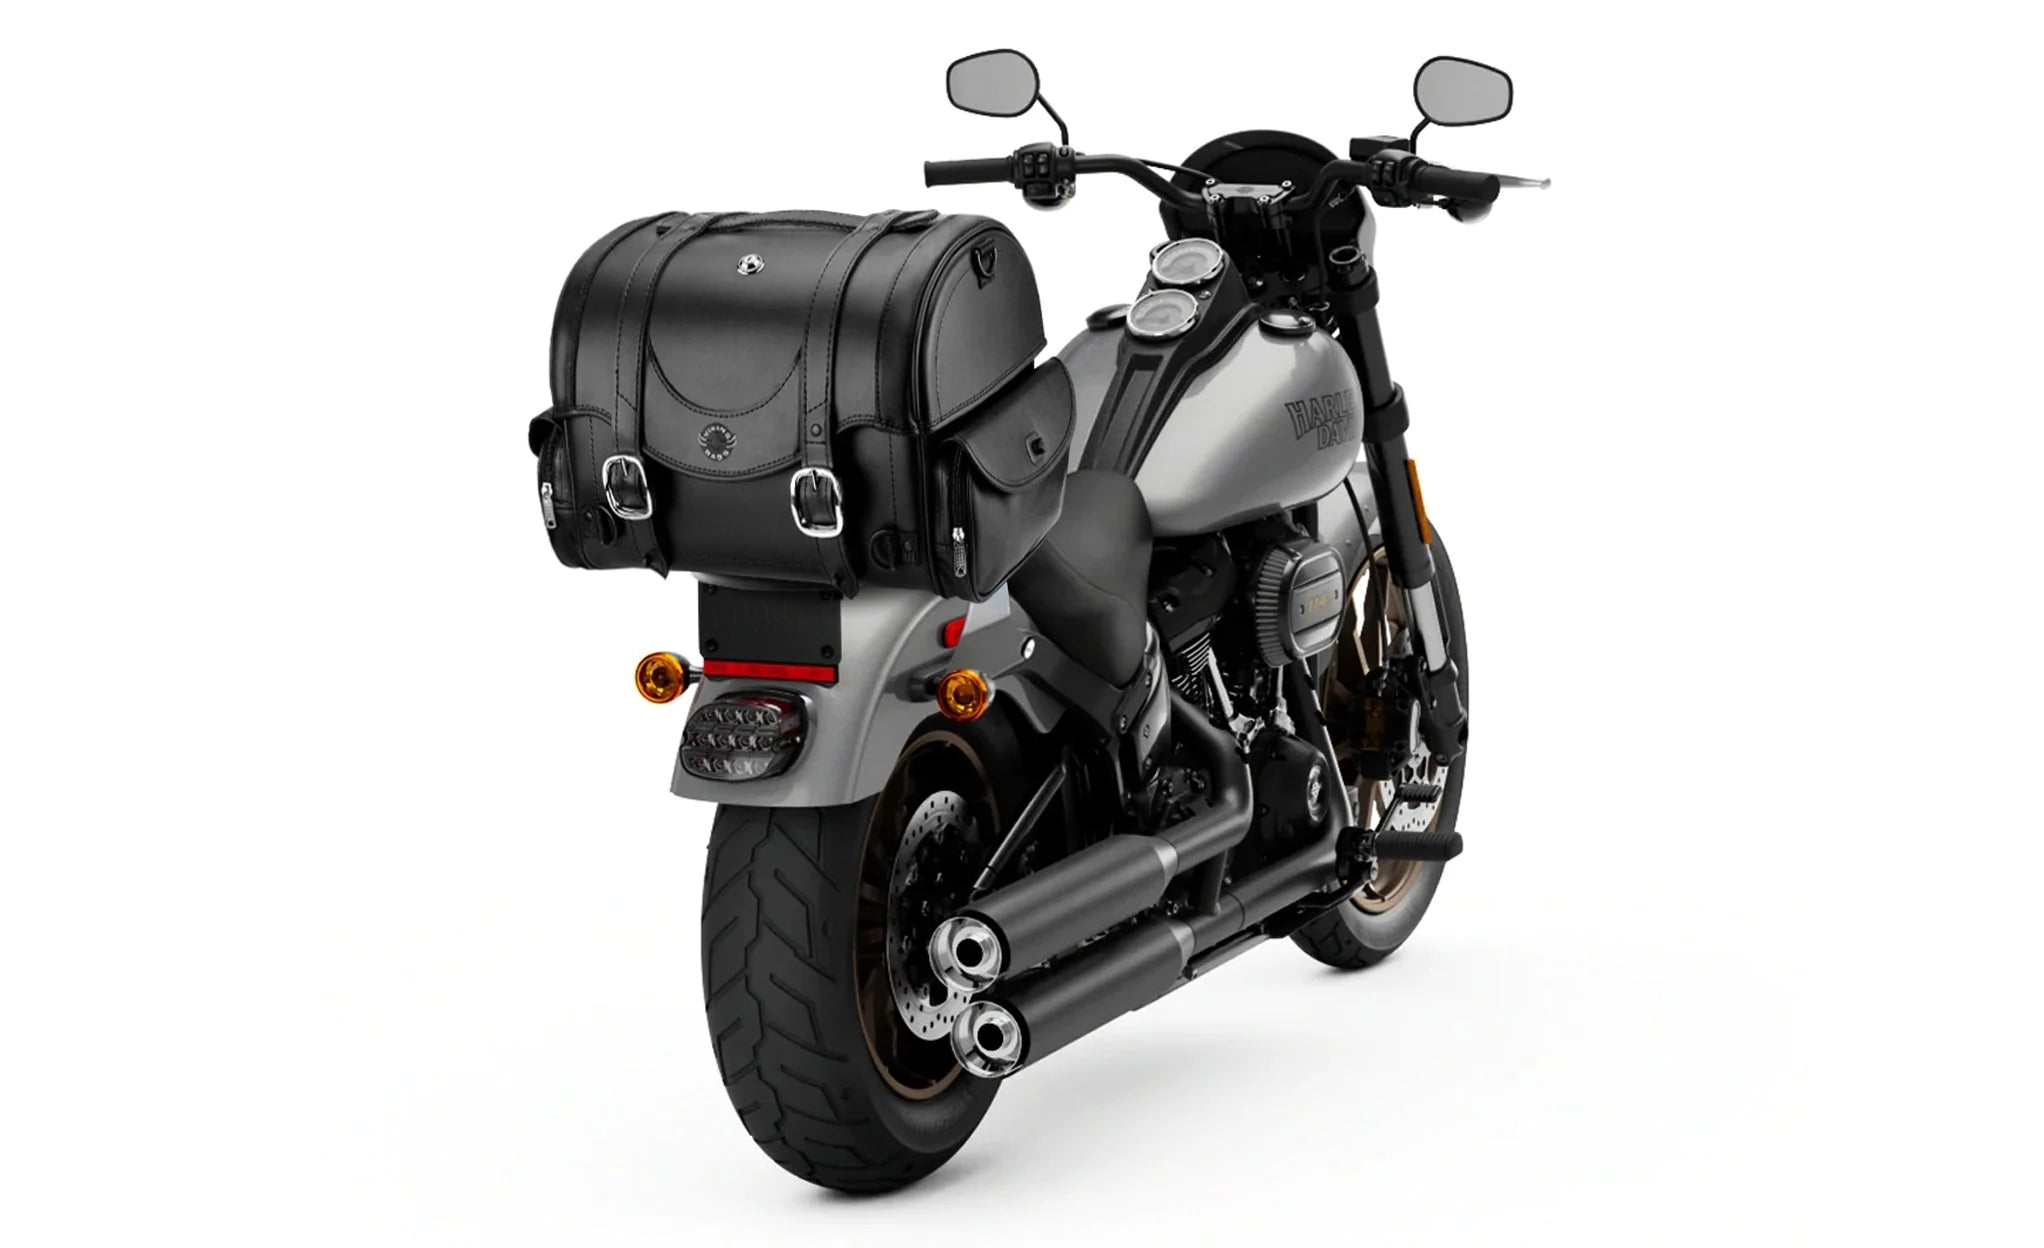 21L - Century Medium Indian Leather Motorcycle Roll Bag on Bike Photo @expand